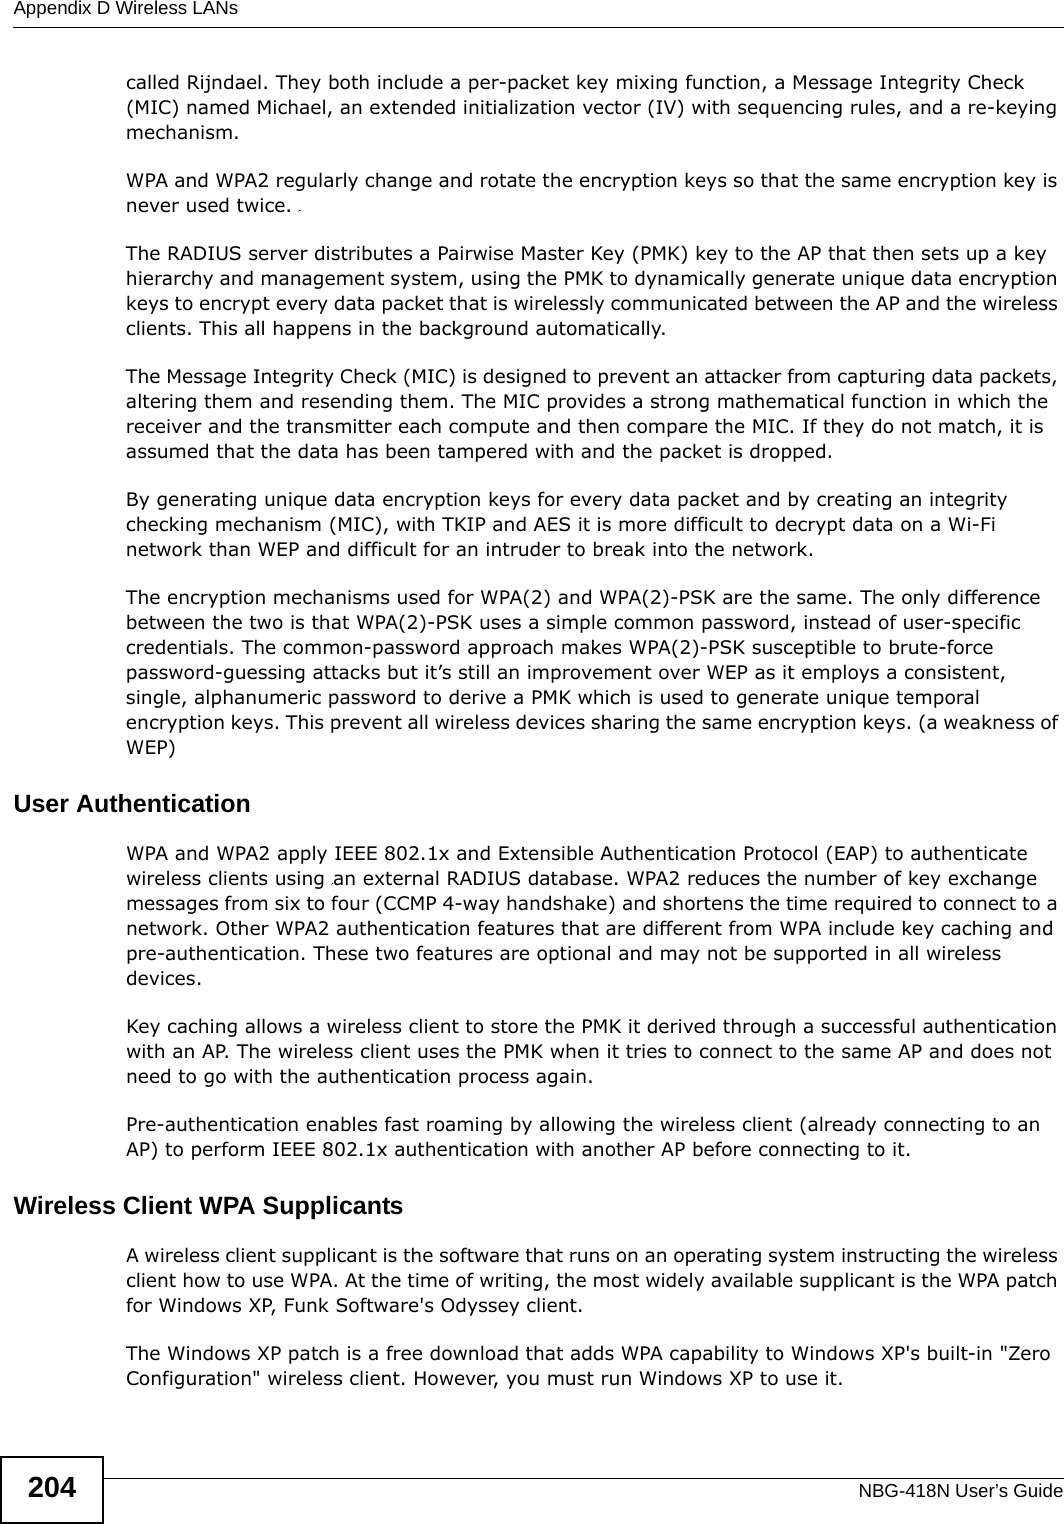 Appendix D Wireless LANsNBG-418N User’s Guide204called Rijndael. They both include a per-packet key mixing function, a Message Integrity Check (MIC) named Michael, an extended initialization vector (IV) with sequencing rules, and a re-keying mechanism.WPA and WPA2 regularly change and rotate the encryption keys so that the same encryption key is never used twice. The RADIUS server distributes a Pairwise Master Key (PMK) key to the AP that then sets up a key hierarchy and management system, using the PMK to dynamically generate unique data encryption keys to encrypt every data packet that is wirelessly communicated between the AP and the wireless clients. This all happens in the background automatically.The Message Integrity Check (MIC) is designed to prevent an attacker from capturing data packets, altering them and resending them. The MIC provides a strong mathematical function in which the receiver and the transmitter each compute and then compare the MIC. If they do not match, it is assumed that the data has been tampered with and the packet is dropped. By generating unique data encryption keys for every data packet and by creating an integrity checking mechanism (MIC), with TKIP and AES it is more difficult to decrypt data on a Wi-Fi network than WEP and difficult for an intruder to break into the network. The encryption mechanisms used for WPA(2) and WPA(2)-PSK are the same. The only difference between the two is that WPA(2)-PSK uses a simple common password, instead of user-specific credentials. The common-password approach makes WPA(2)-PSK susceptible to brute-force password-guessing attacks but it’s still an improvement over WEP as it employs a consistent, single, alphanumeric password to derive a PMK which is used to generate unique temporal encryption keys. This prevent all wireless devices sharing the same encryption keys. (a weakness of WEP)User Authentication WPA and WPA2 apply IEEE 802.1x and Extensible Authentication Protocol (EAP) to authenticate wireless clients using an external RADIUS database. WPA2 reduces the number of key exchange messages from six to four (CCMP 4-way handshake) and shortens the time required to connect to a network. Other WPA2 authentication features that are different from WPA include key caching and pre-authentication. These two features are optional and may not be supported in all wireless devices.Key caching allows a wireless client to store the PMK it derived through a successful authentication with an AP. The wireless client uses the PMK when it tries to connect to the same AP and does not need to go with the authentication process again.Pre-authentication enables fast roaming by allowing the wireless client (already connecting to an AP) to perform IEEE 802.1x authentication with another AP before connecting to it.Wireless Client WPA SupplicantsA wireless client supplicant is the software that runs on an operating system instructing the wireless client how to use WPA. At the time of writing, the most widely available supplicant is the WPA patch for Windows XP, Funk Software&apos;s Odyssey client. The Windows XP patch is a free download that adds WPA capability to Windows XP&apos;s built-in &quot;Zero Configuration&quot; wireless client. However, you must run Windows XP to use it. 